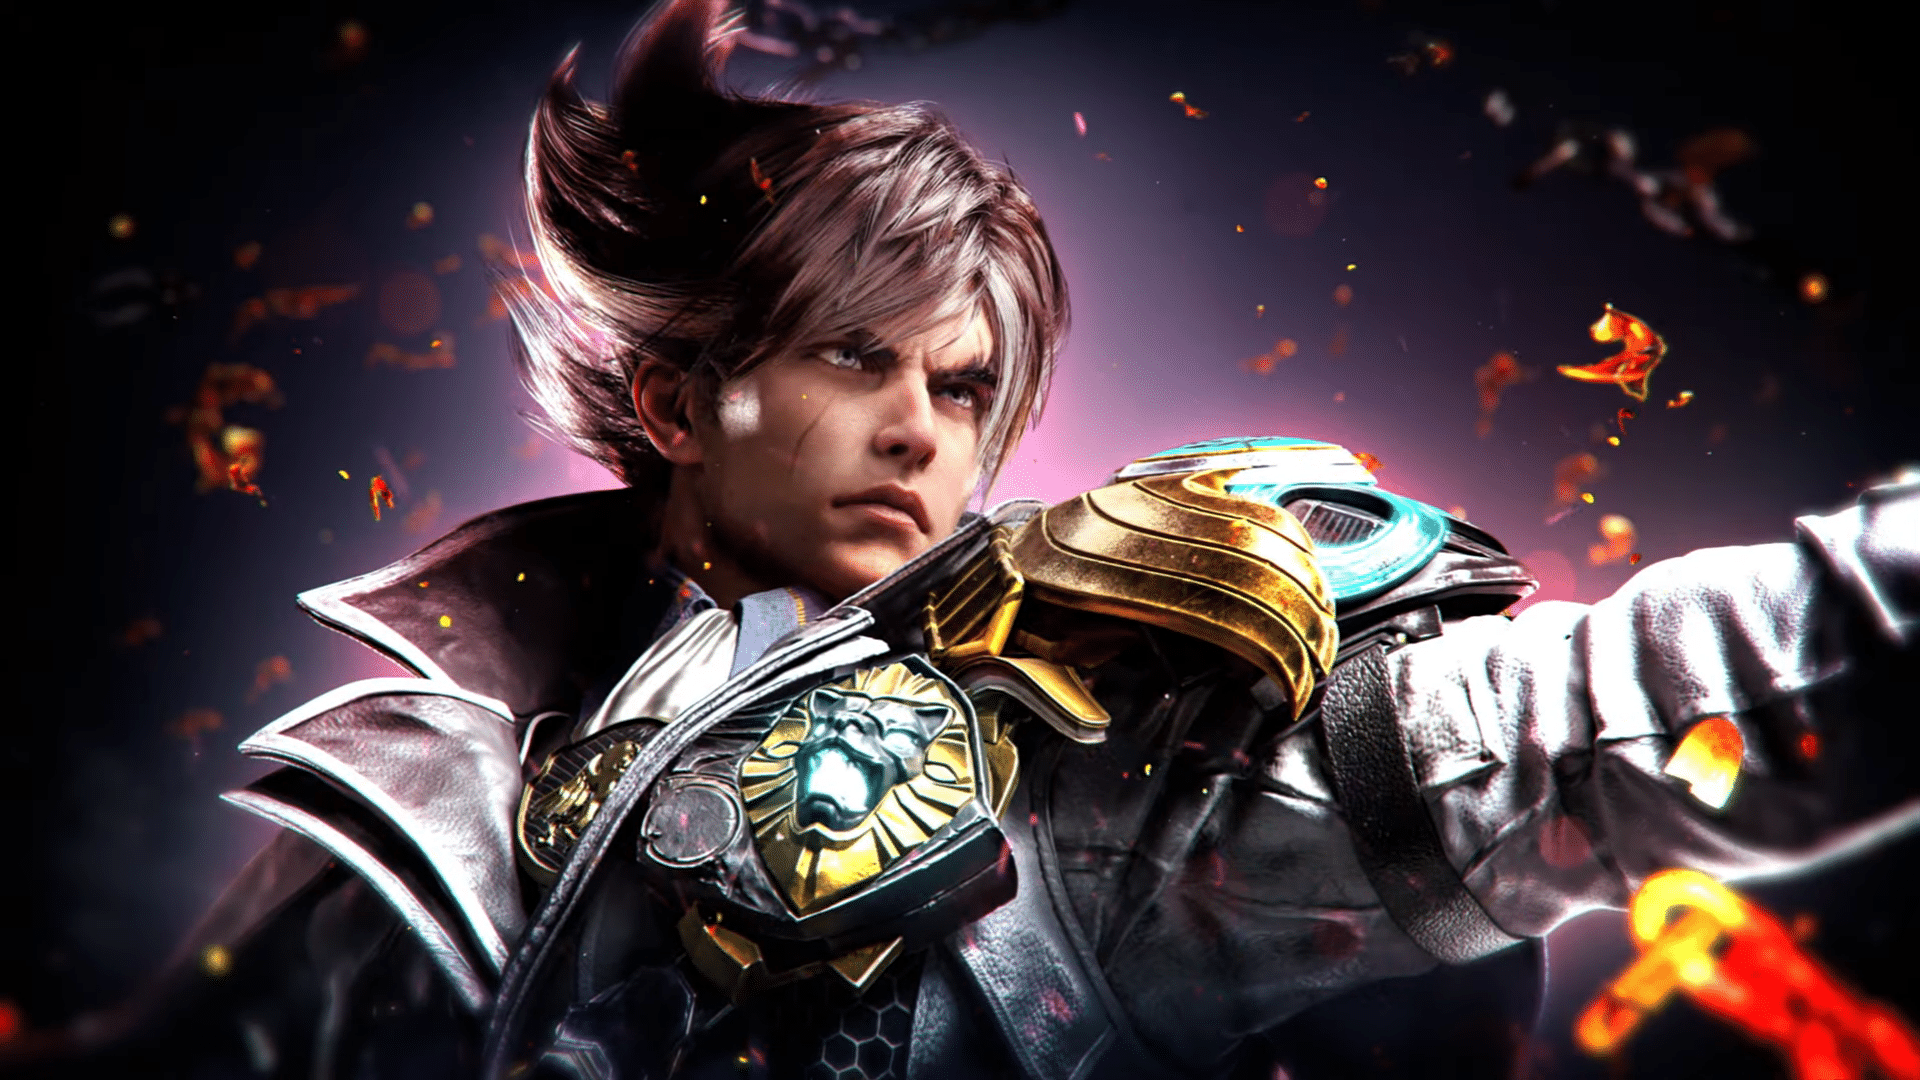 New Tekken 8 Character Trailer Introduces “The Lion of the Rebellion,” Lars Alexandersson